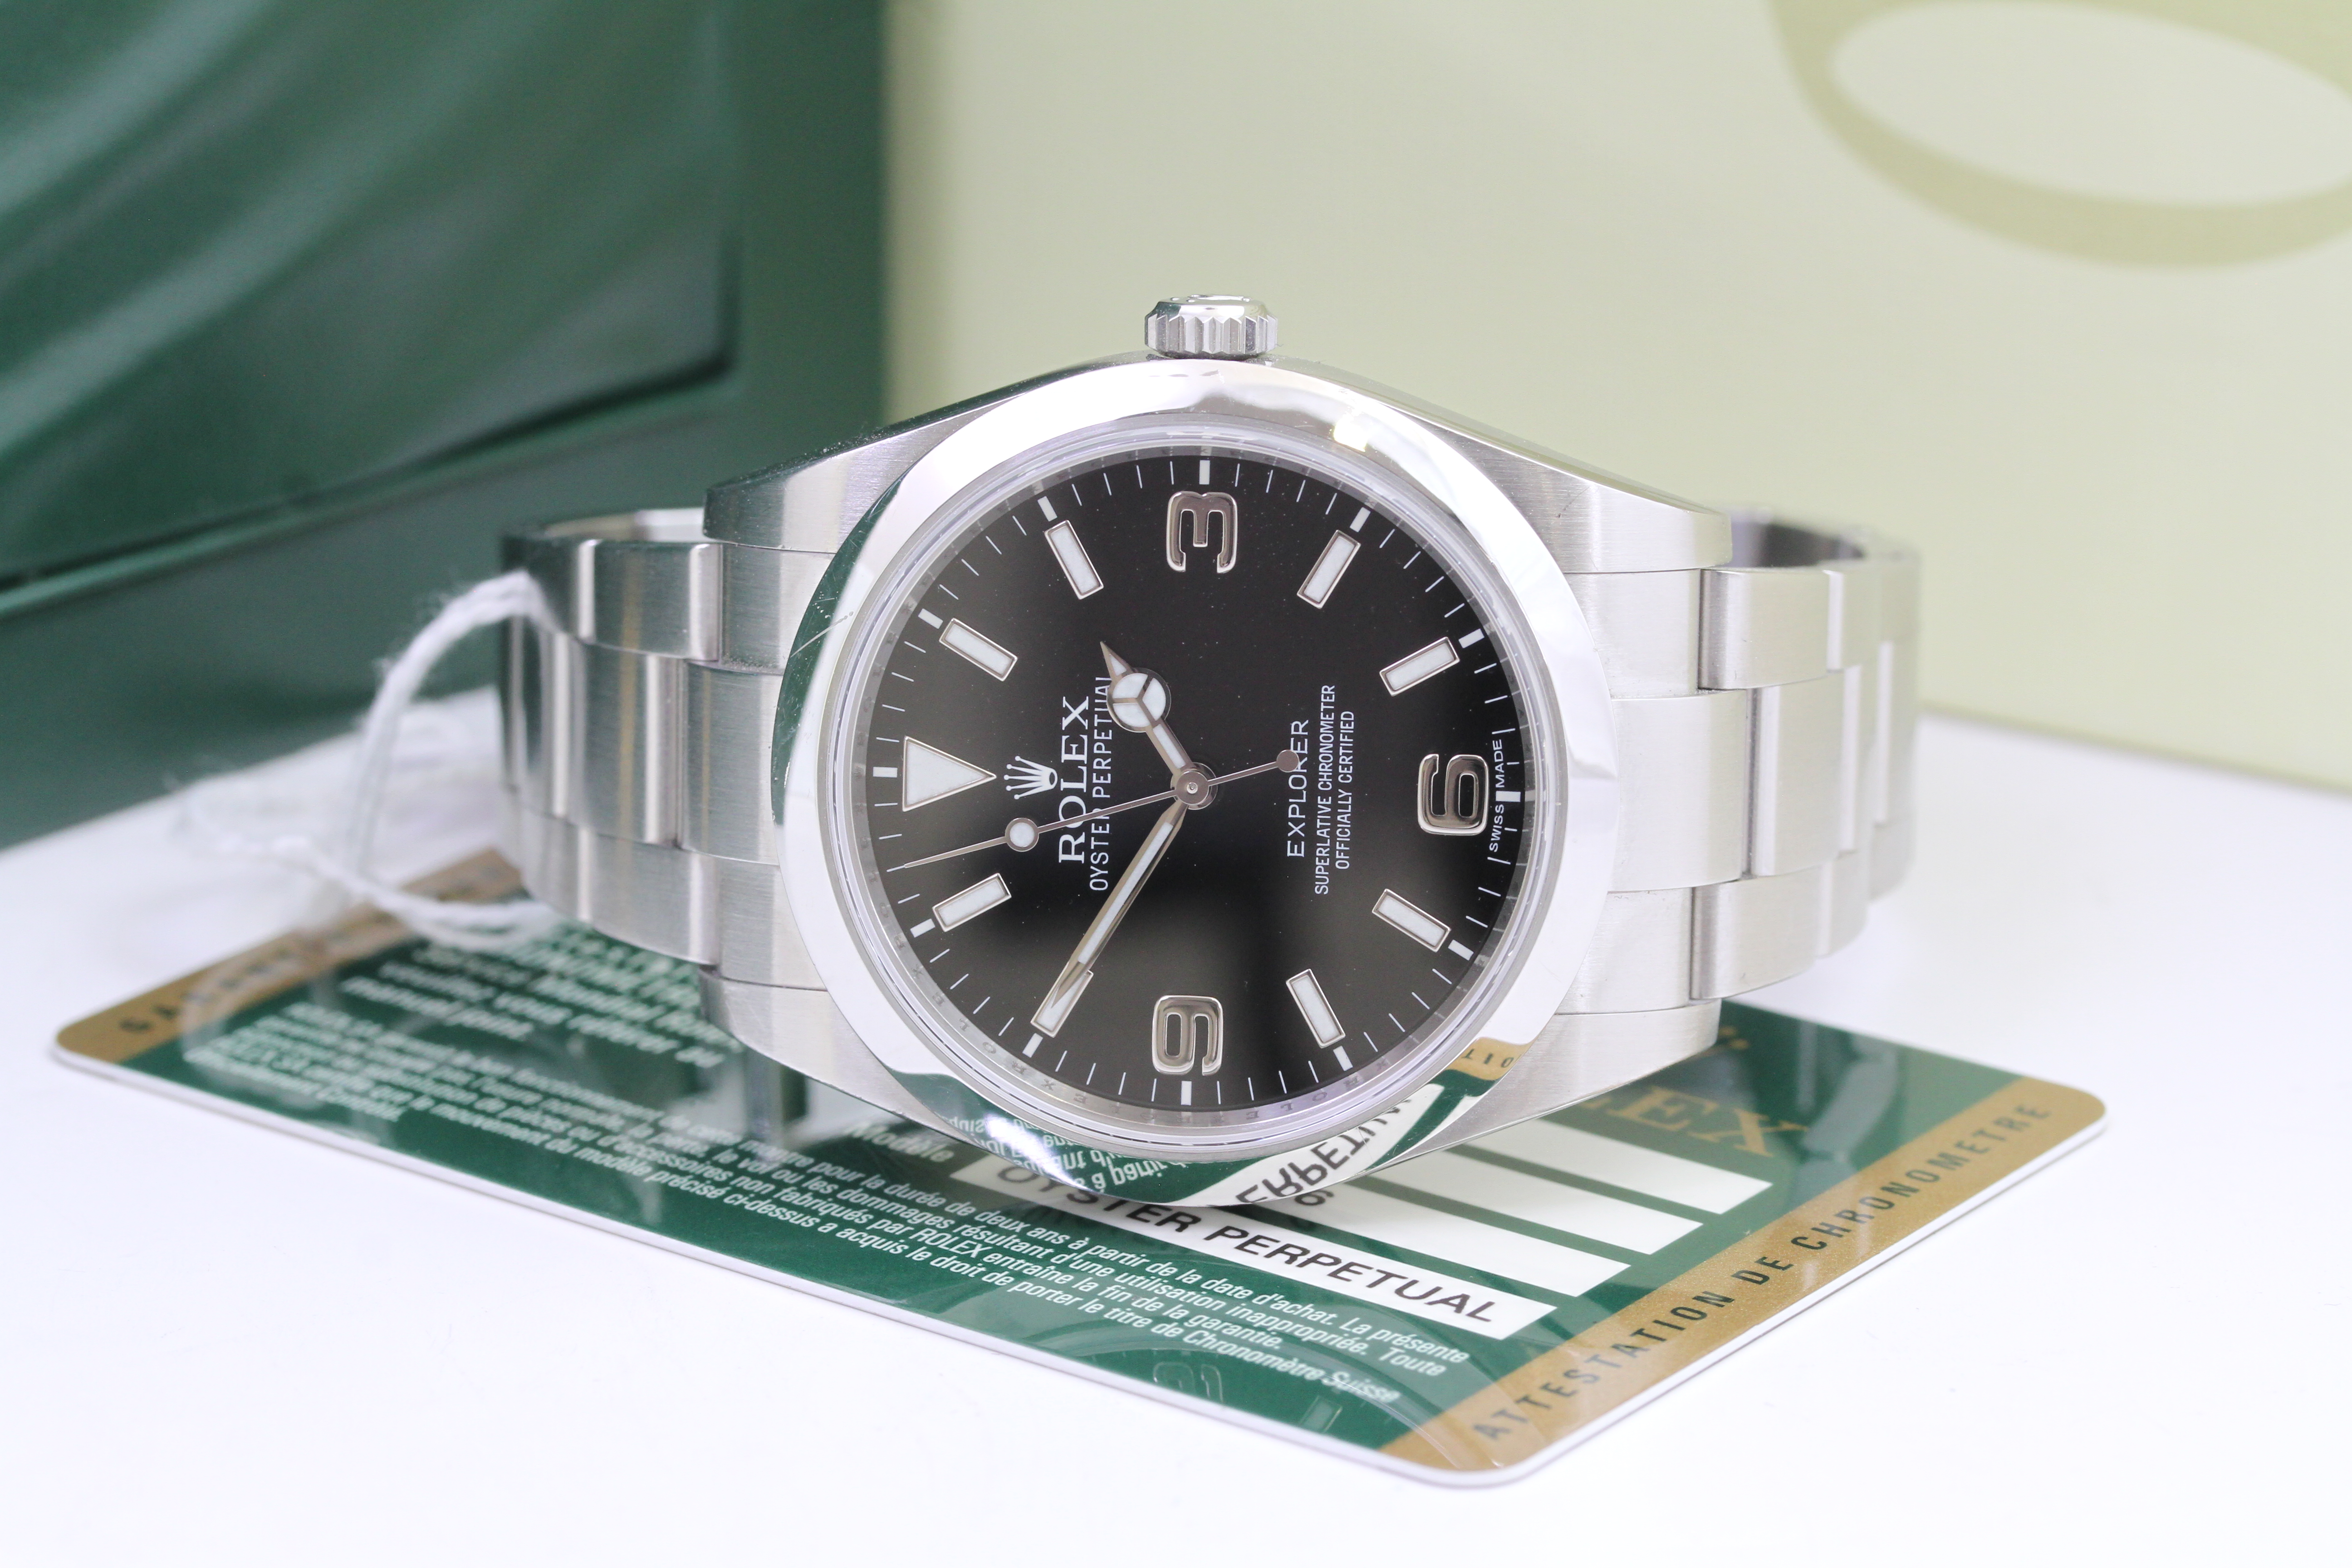 ROLEX EXPLORER 214270 BOX AND PAPEES 2012, circular black dial with applied hour markers, iconic 3,6